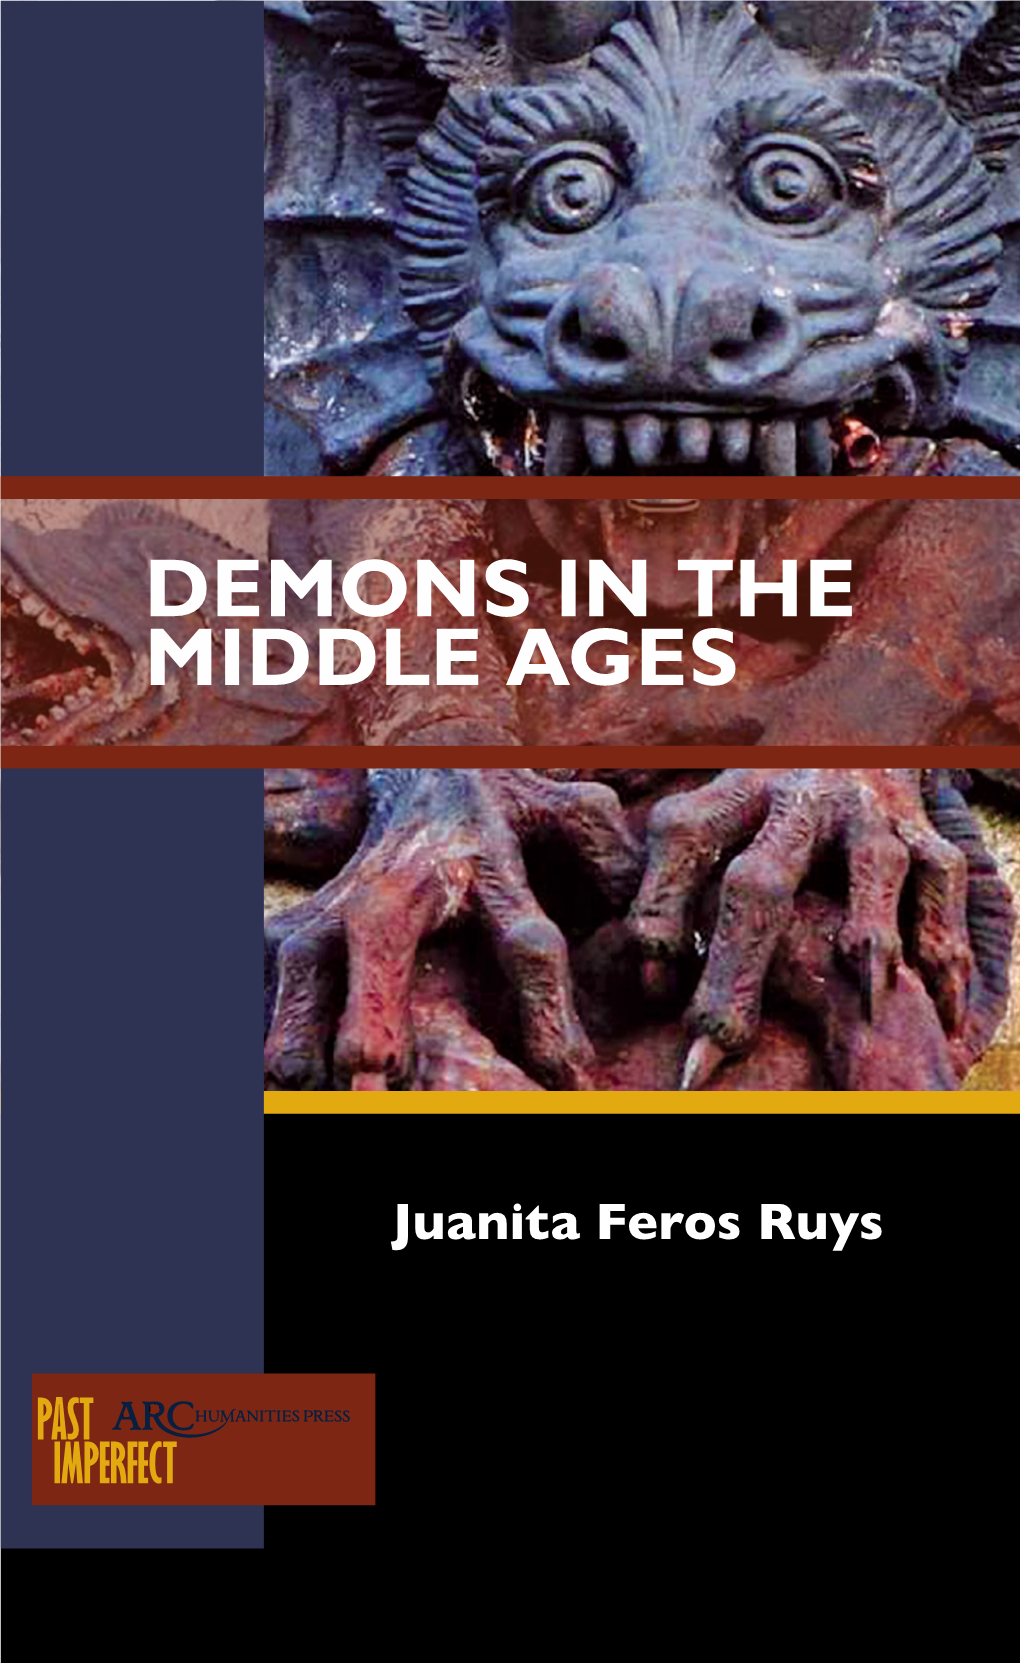 Juanita Feros Ruys Is an Intellectual Historian of the European Middle Ages, Specializing in the Writings of Abelard and Heloise